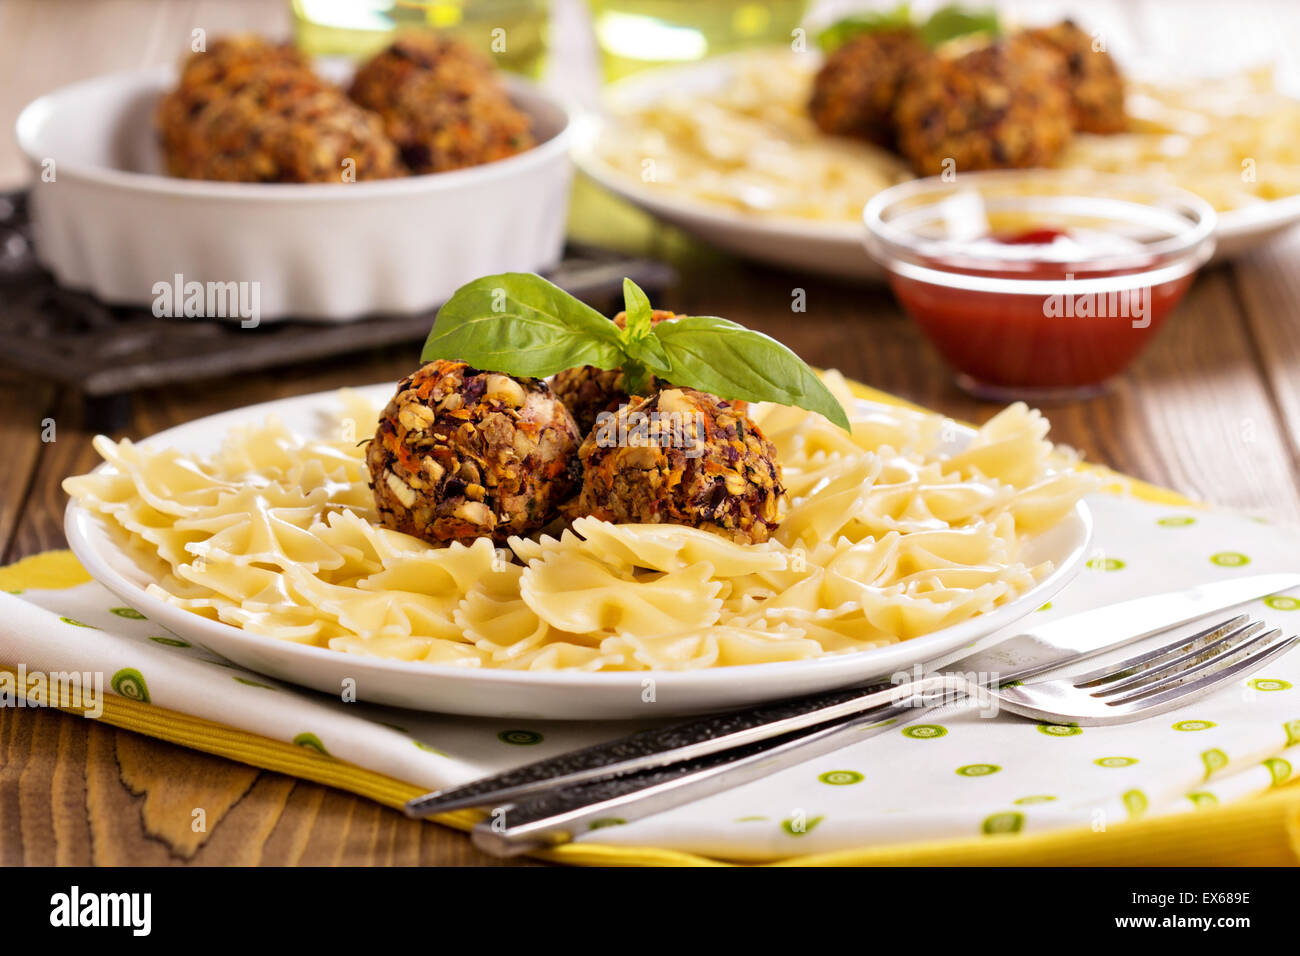 Vegan meatballs made with beans and vegetables Stock Photo